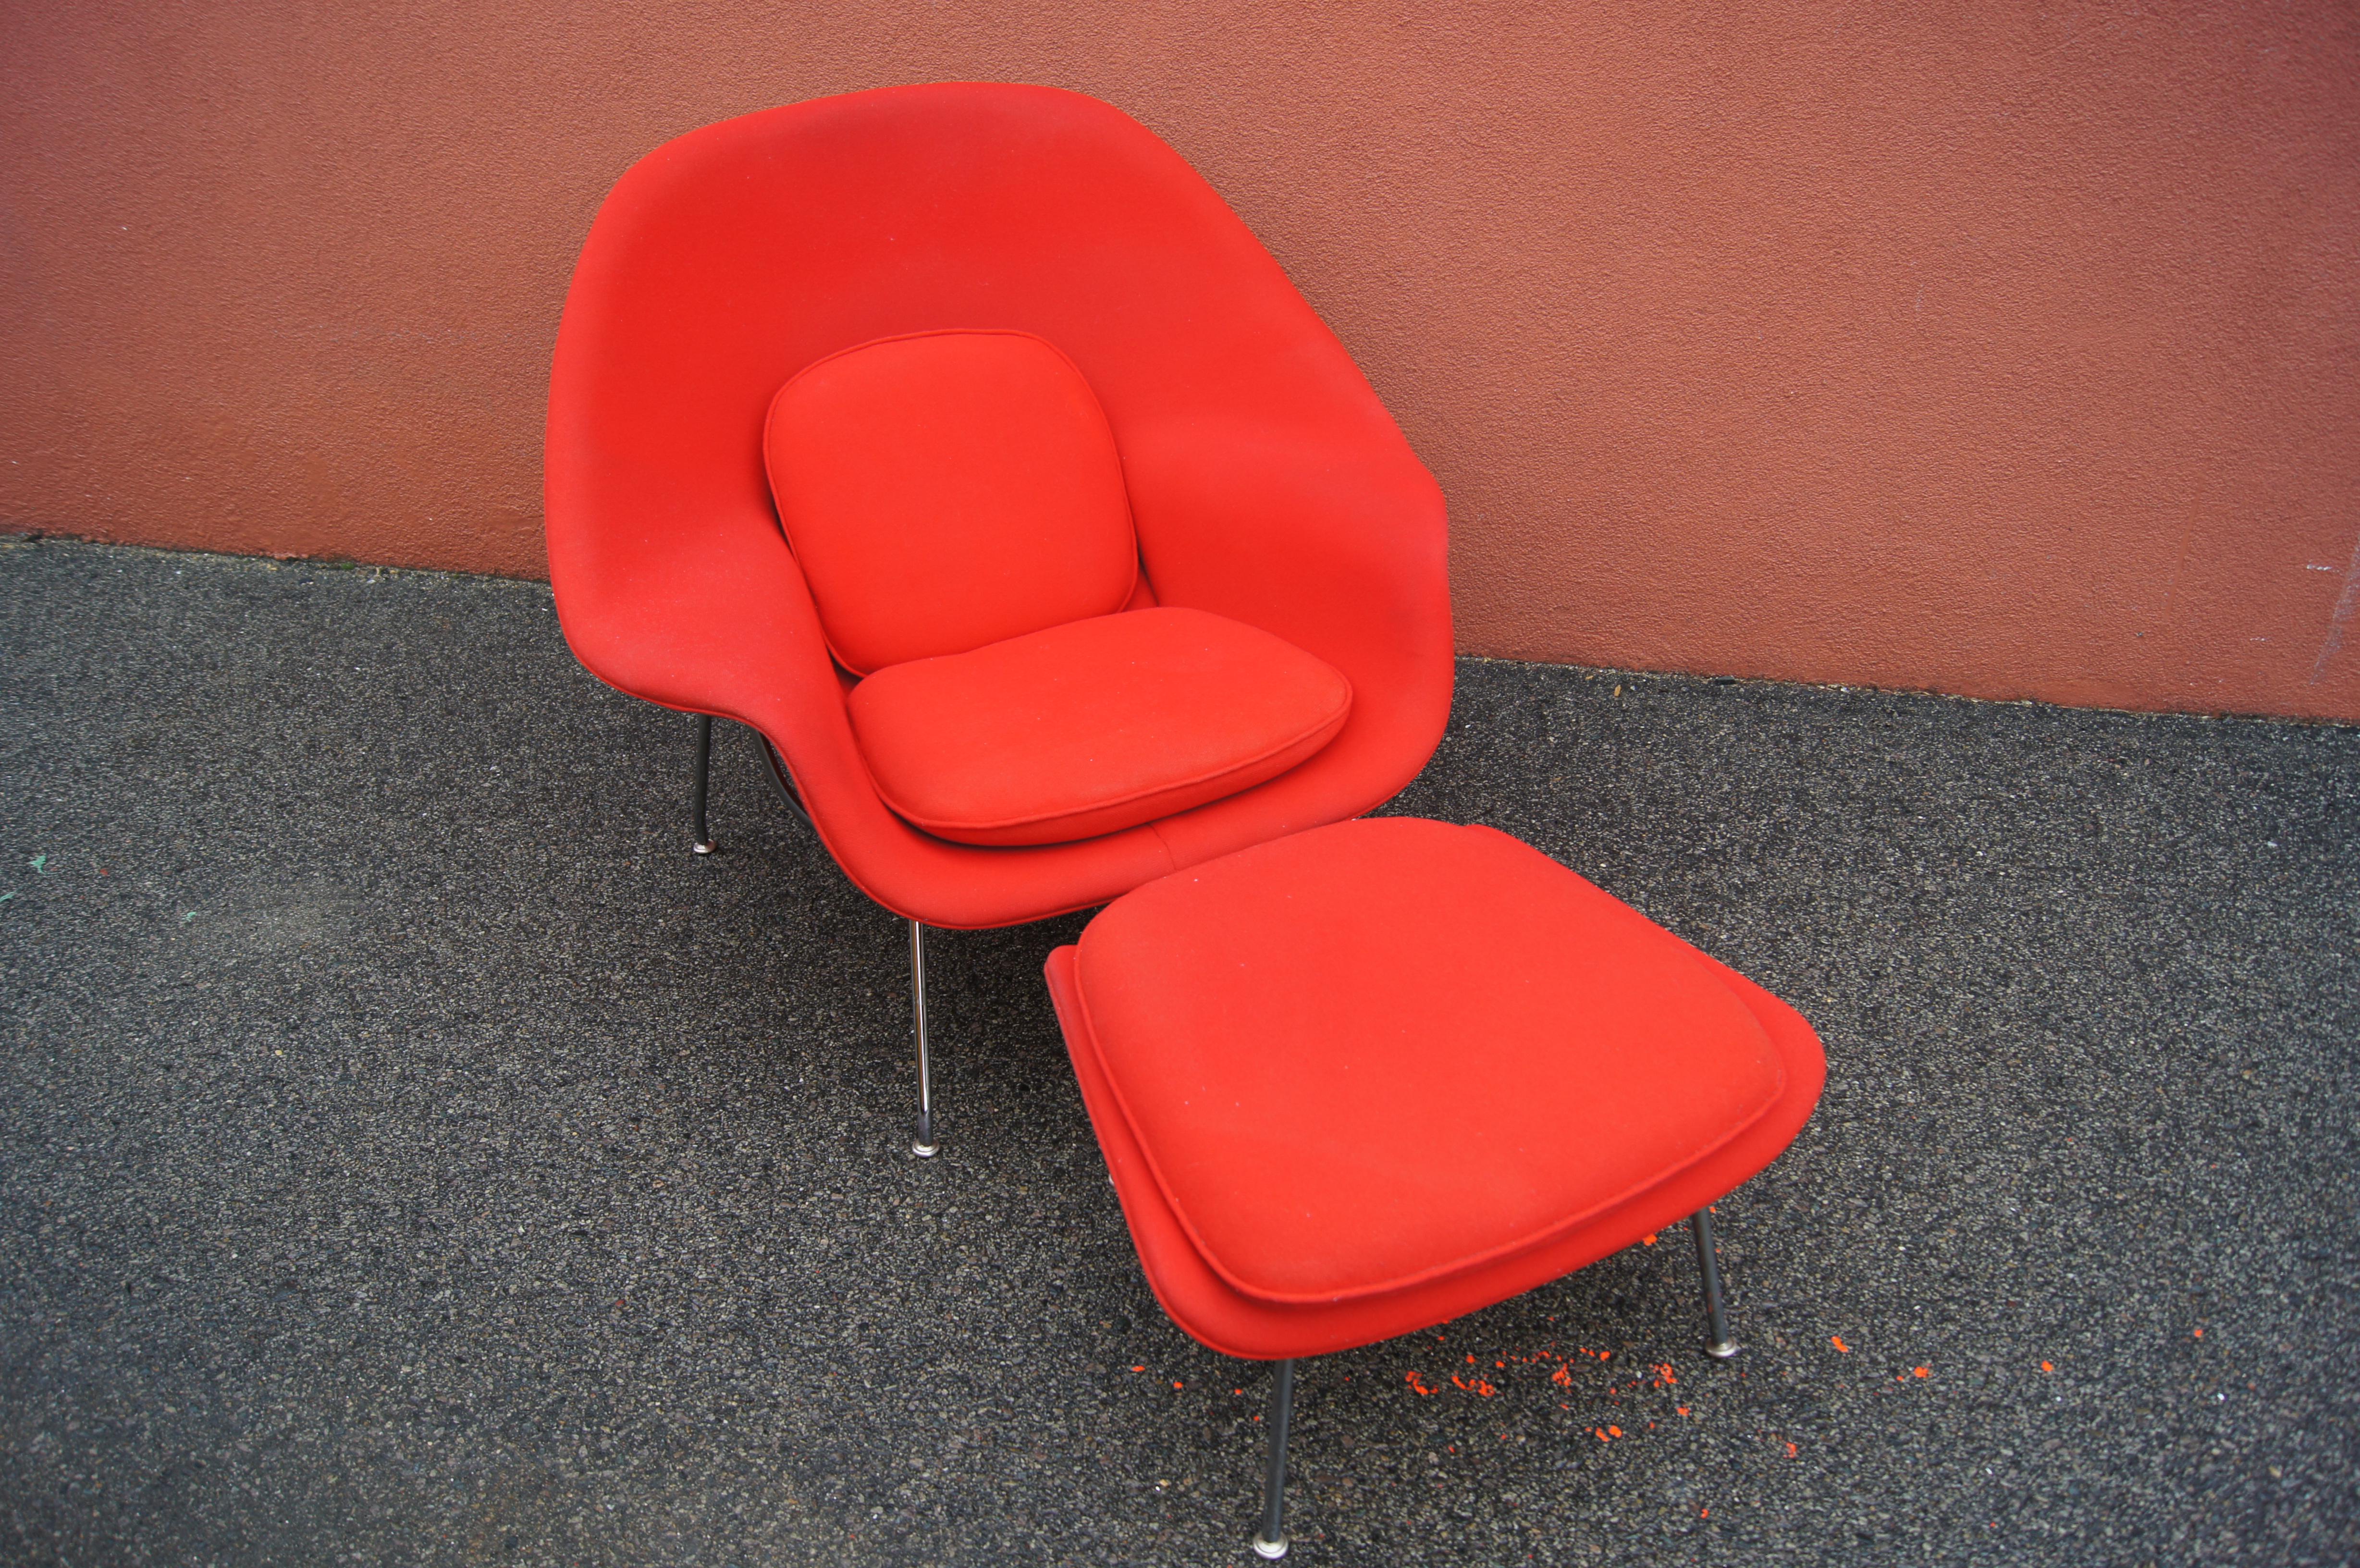 Designed by Eero Saarinen for Knoll in 1948, the Womb Chair places a comfortable foam-covered fiberglass shell into a chromed steel rod frame. This Classic womb chair and its matching ottoman are upholstered in the original red-hued Knoll Haze